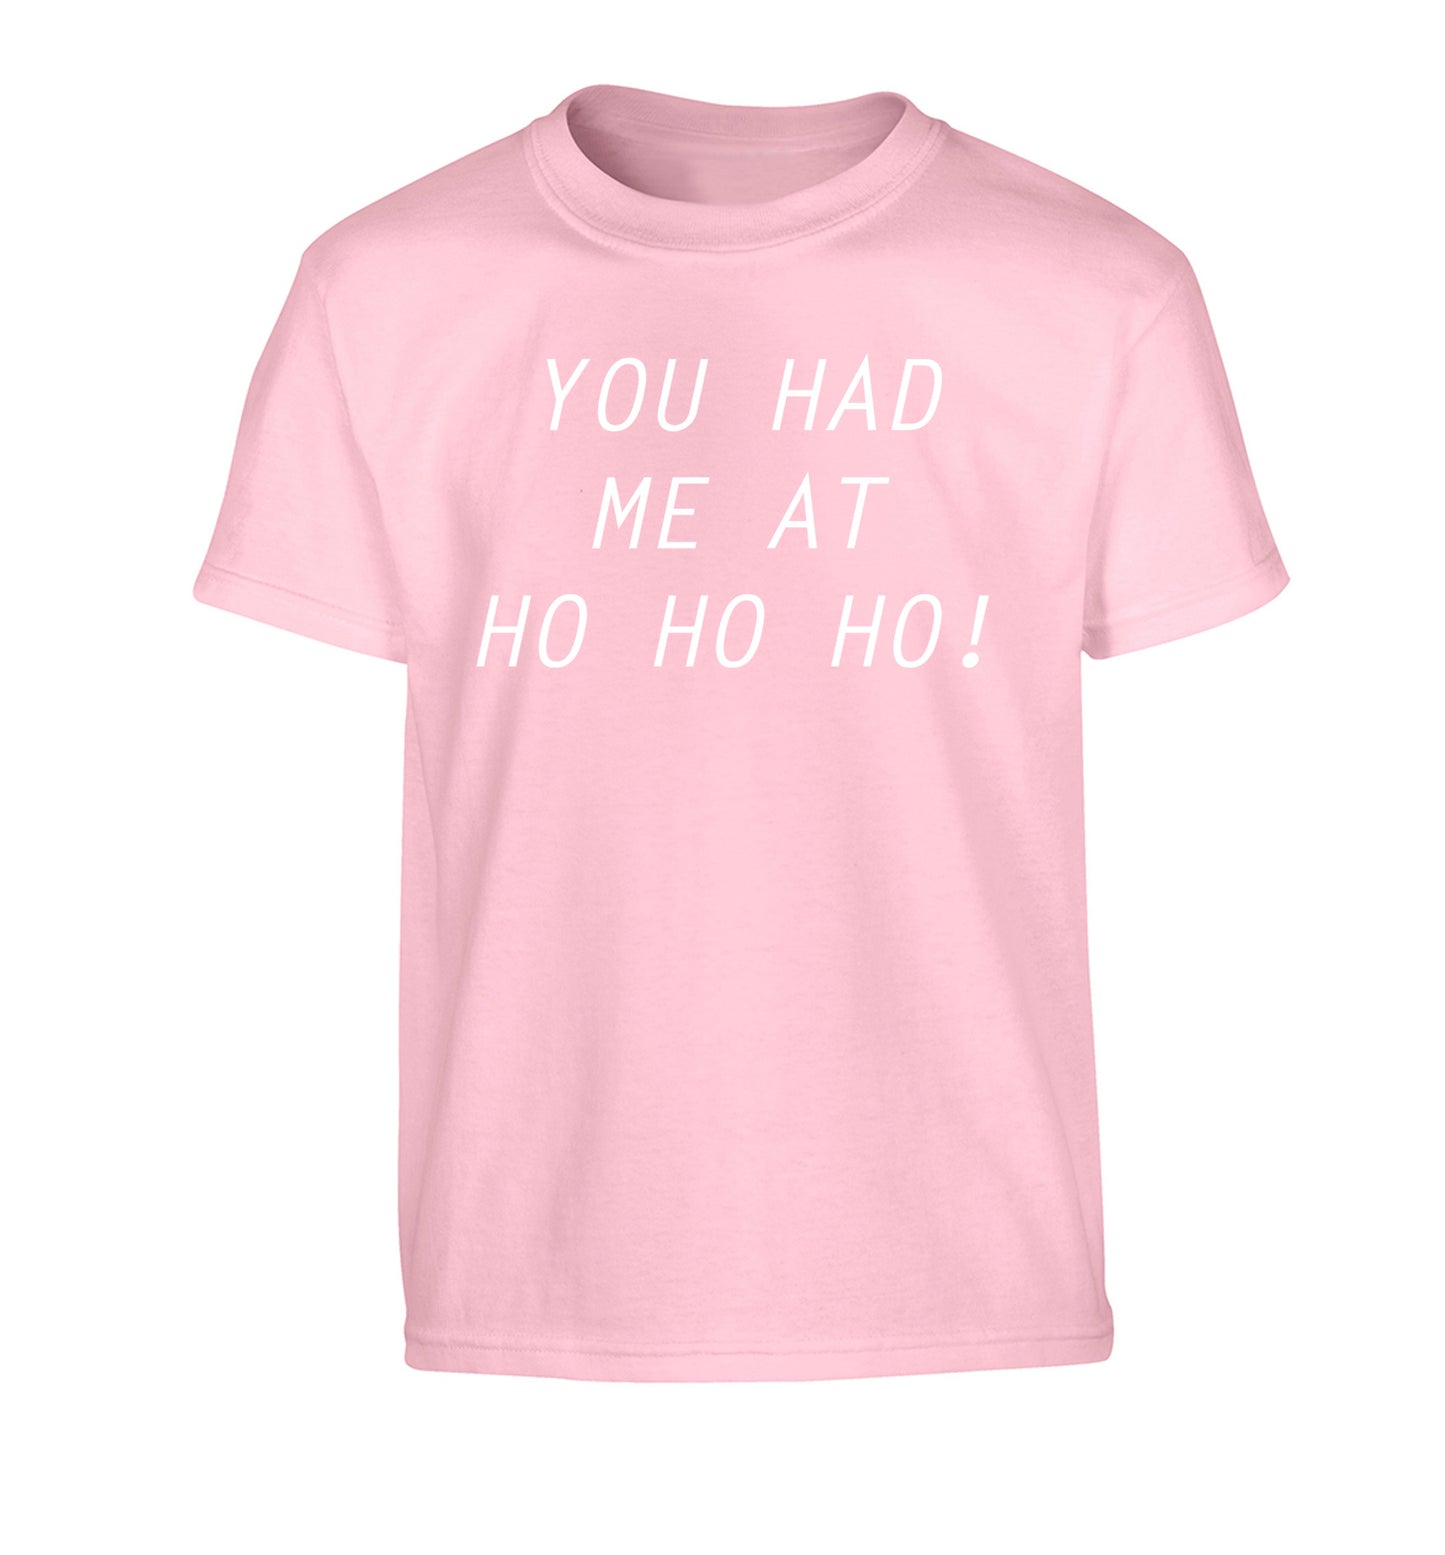 You had me at ho ho ho Children's light pink Tshirt 12-14 Years